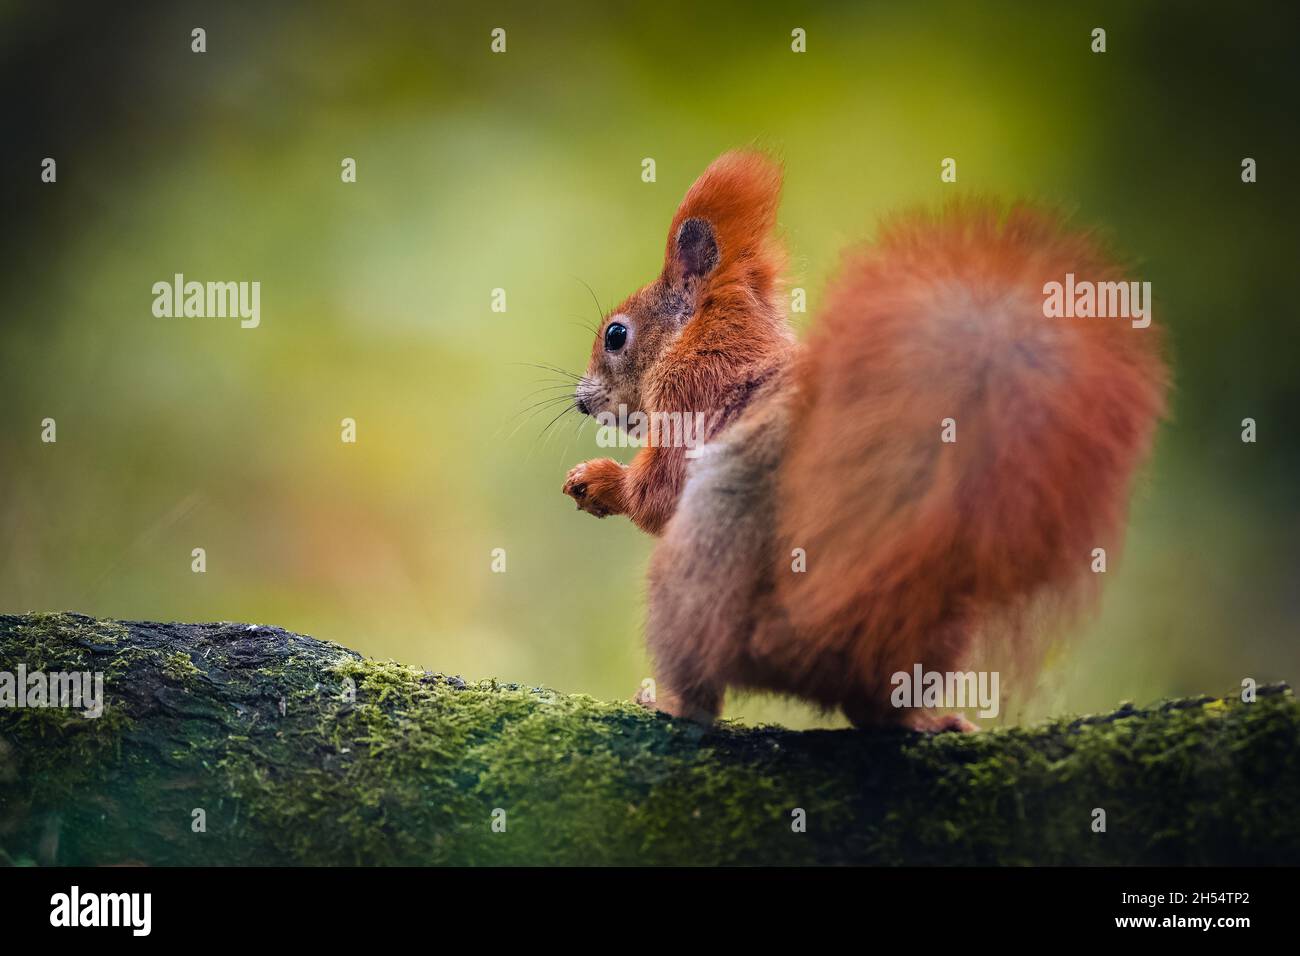 The Eurasian red squirrel (Sciurus vulgaris) sitting on a branch with its back to the camera looking back. Beautiful autumn colors, delicate backgroun Stock Photo